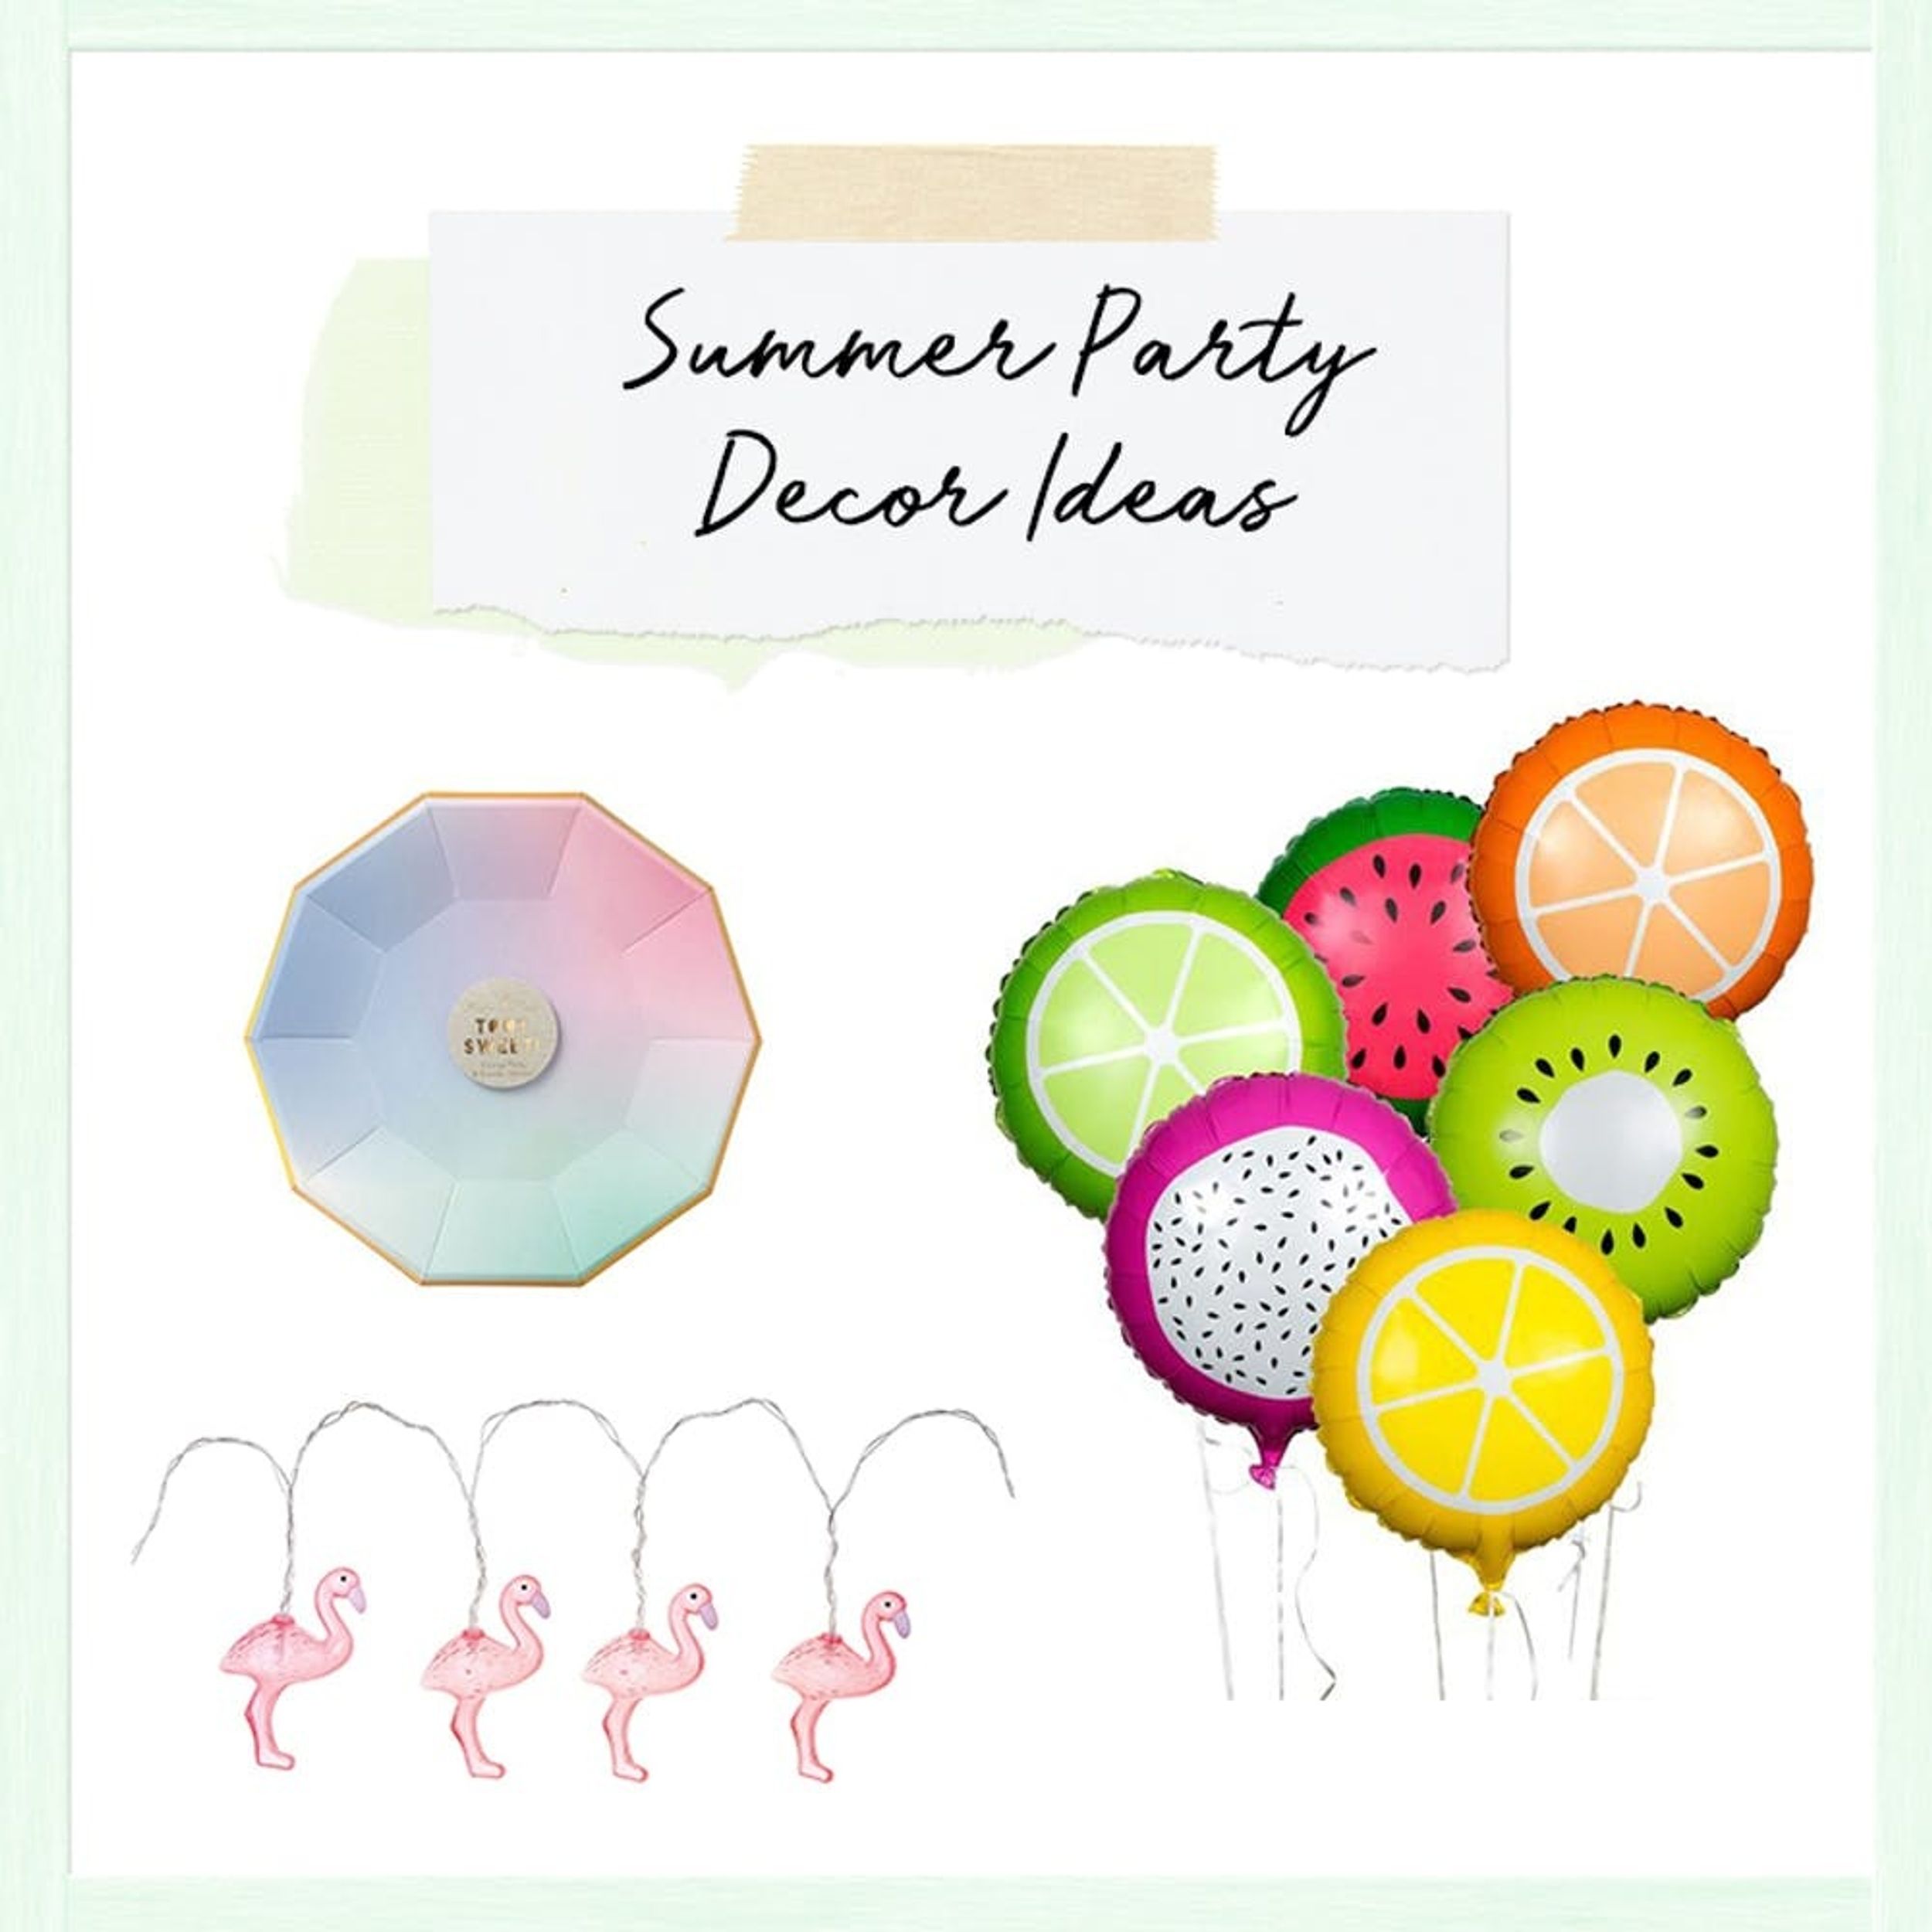 3 End-of-Summer Party Ideas to Win *All* the Hostess Points